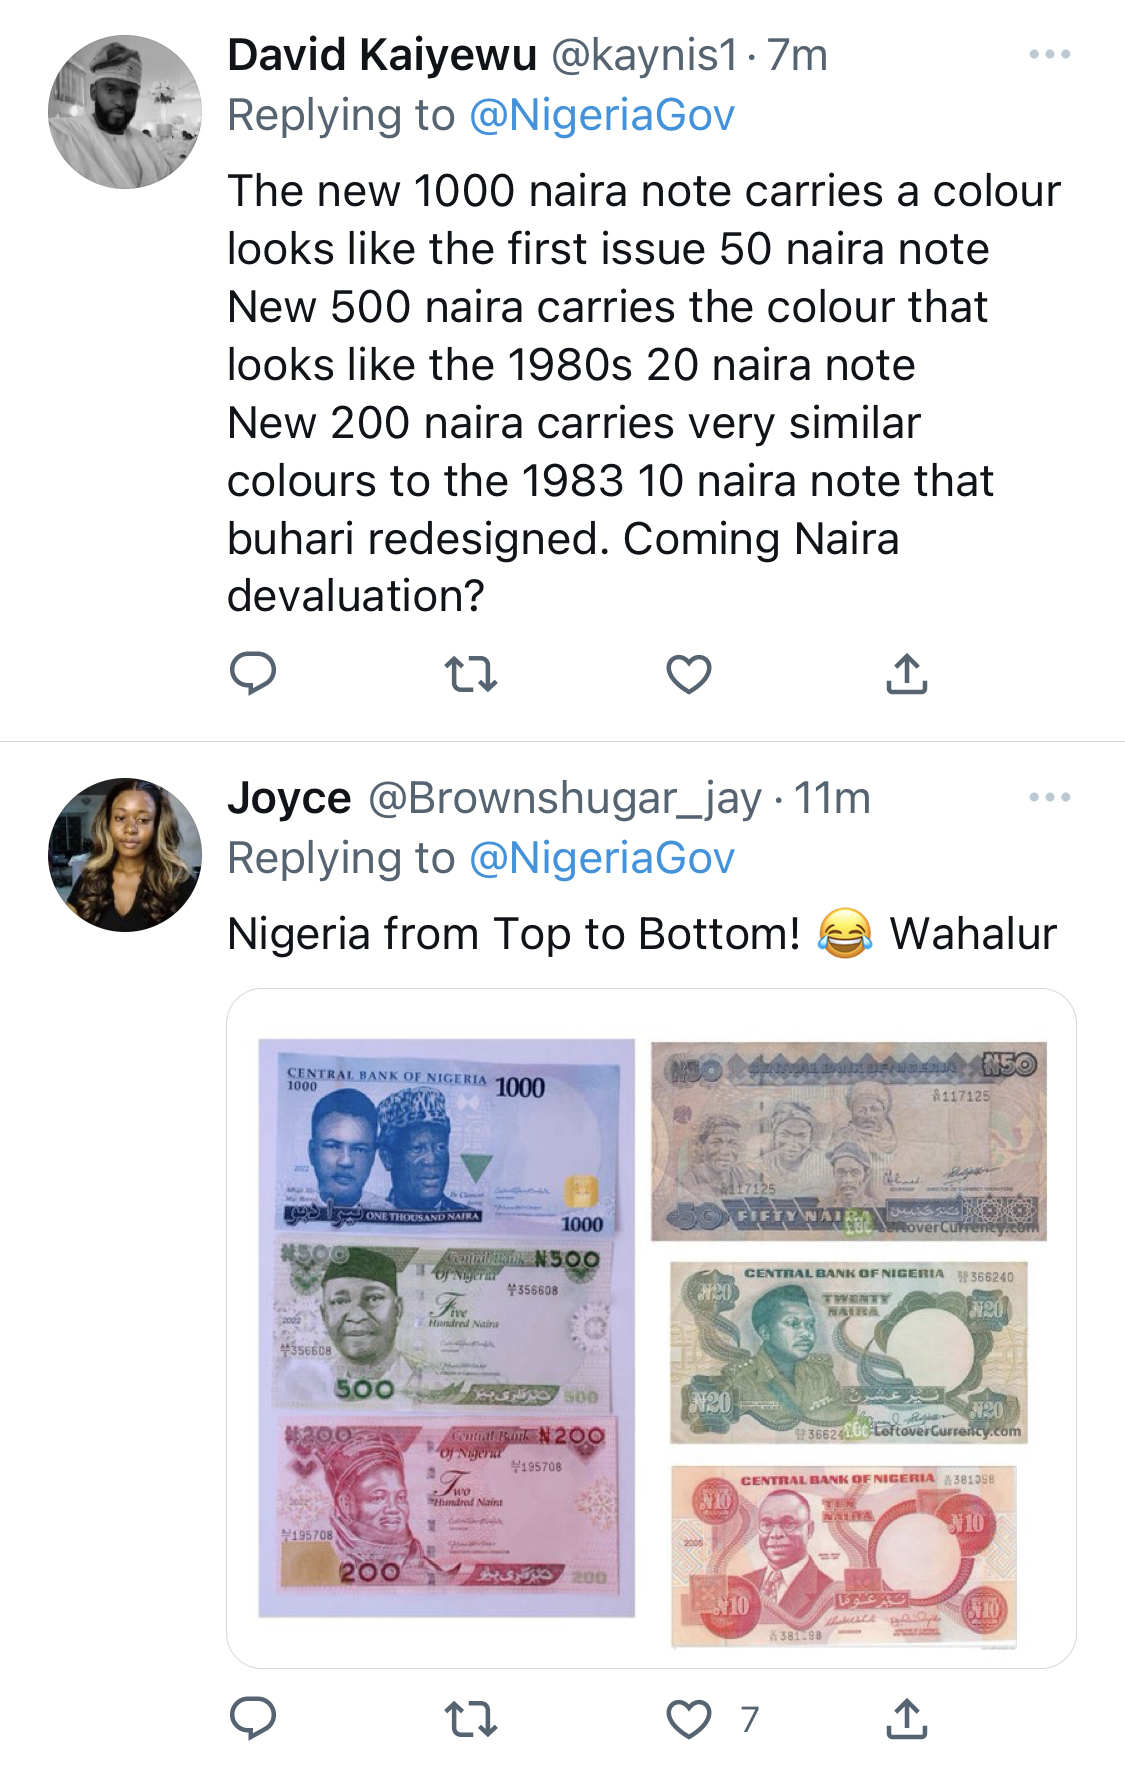 We might as well dye our old notes at home - New Naira Notes Design sparks Outrage